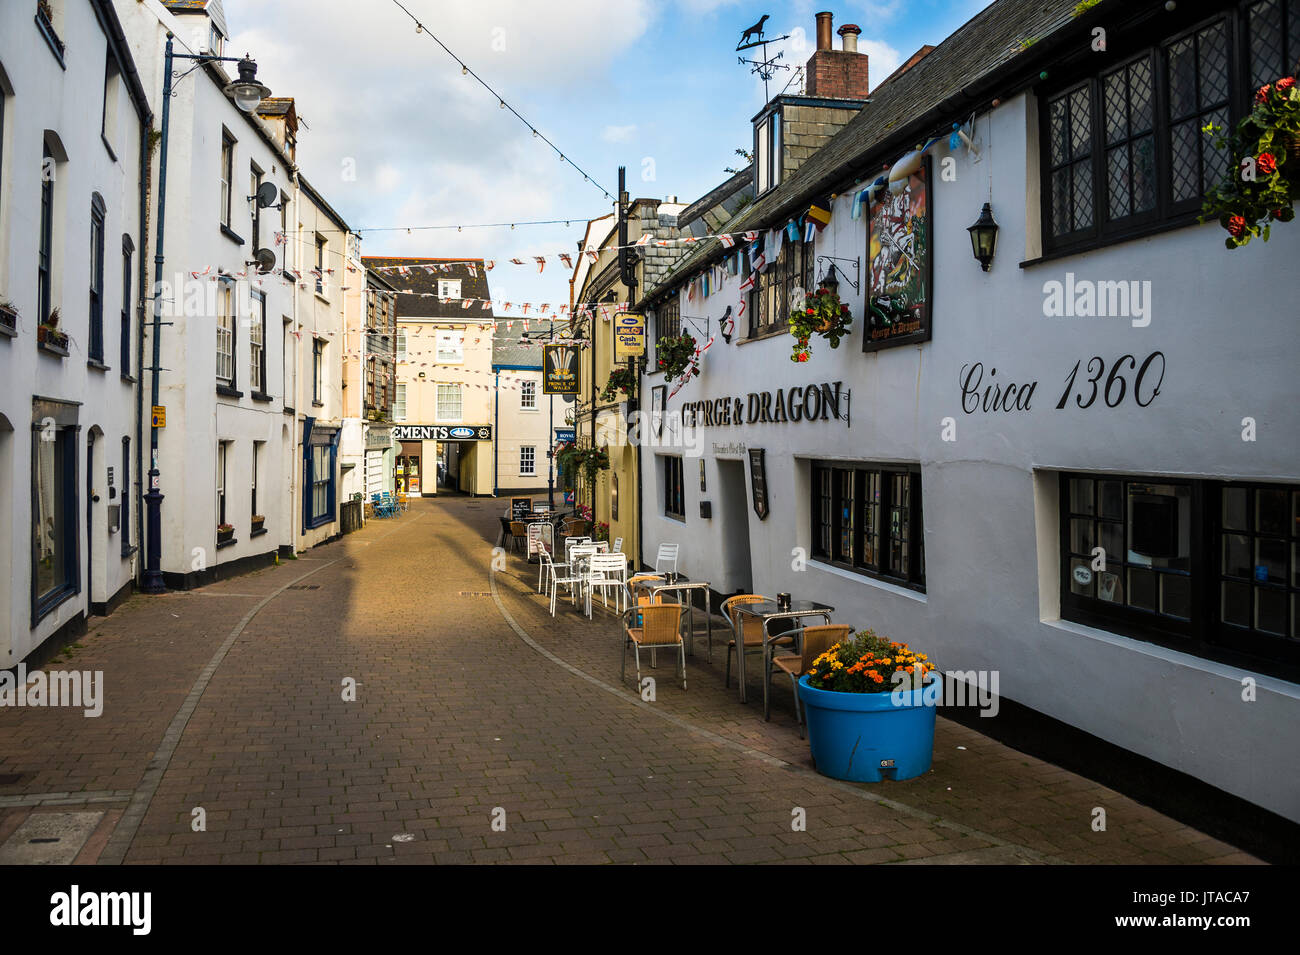 Picturesque harbour town of Ifracombe, North Devon, England, United Kingdom, Europe Stock Photo